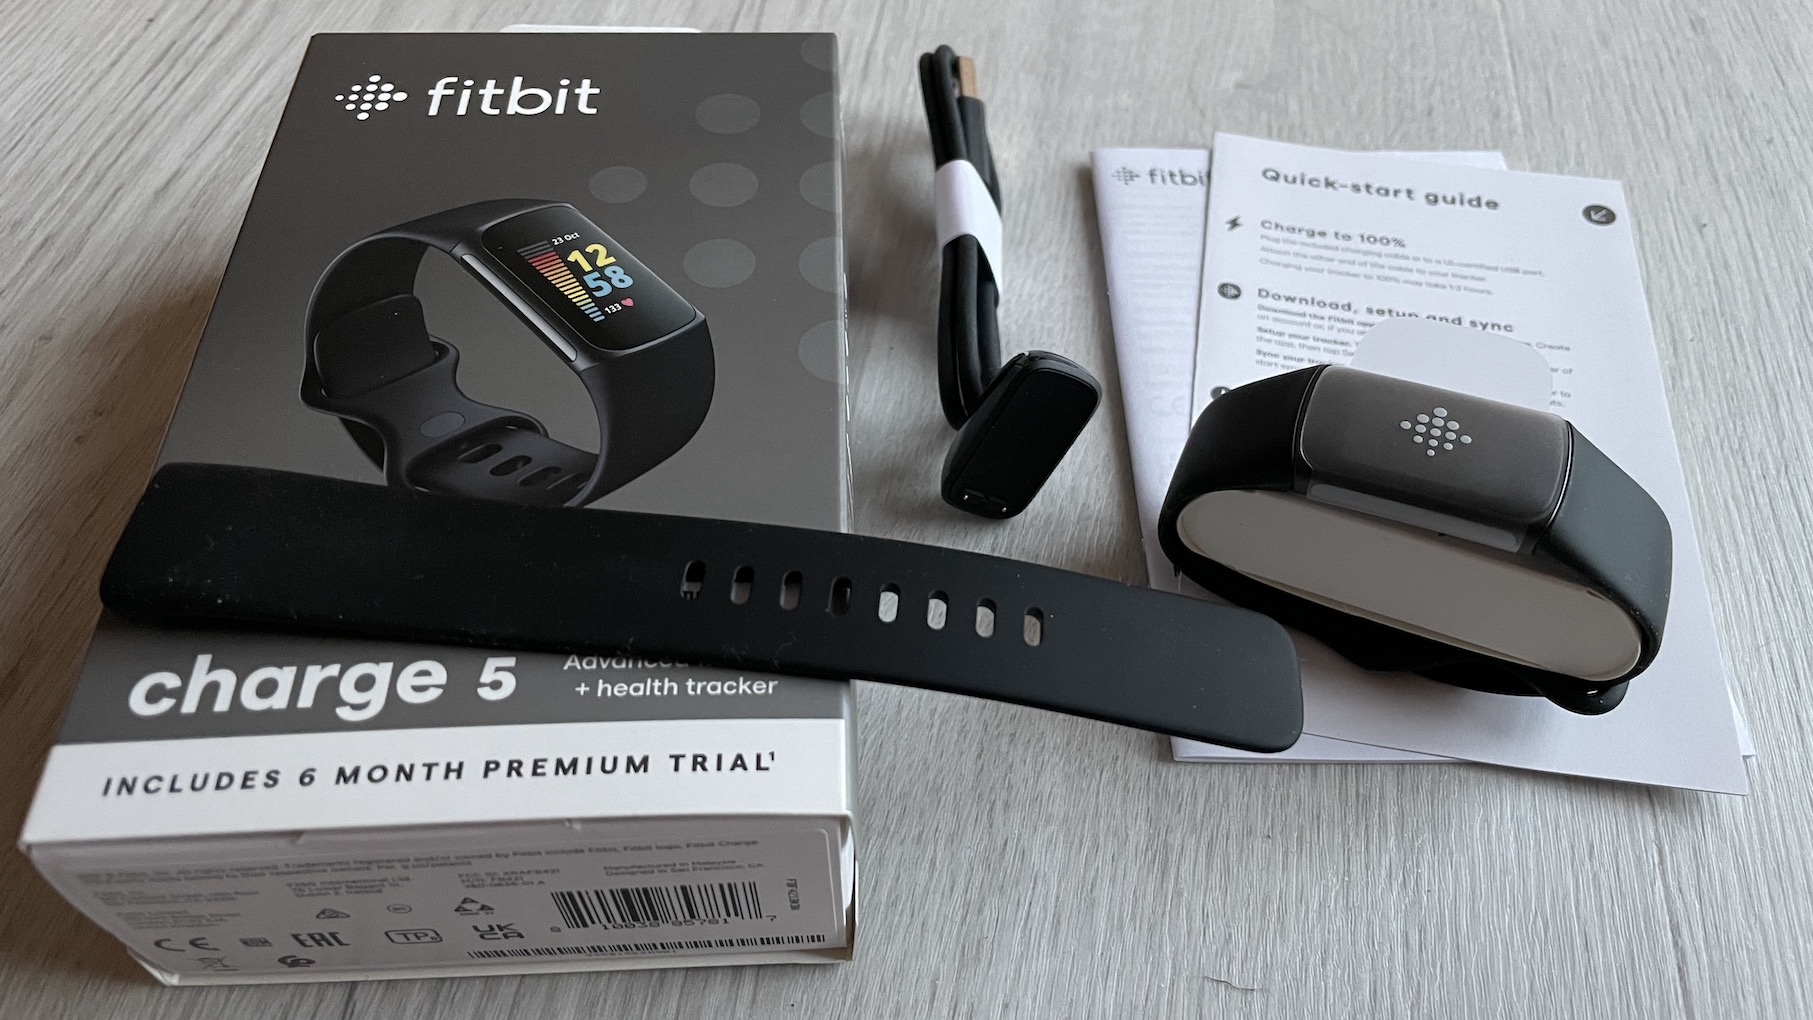 Fitbit Charge 5 smartwatch review: Many health functions for